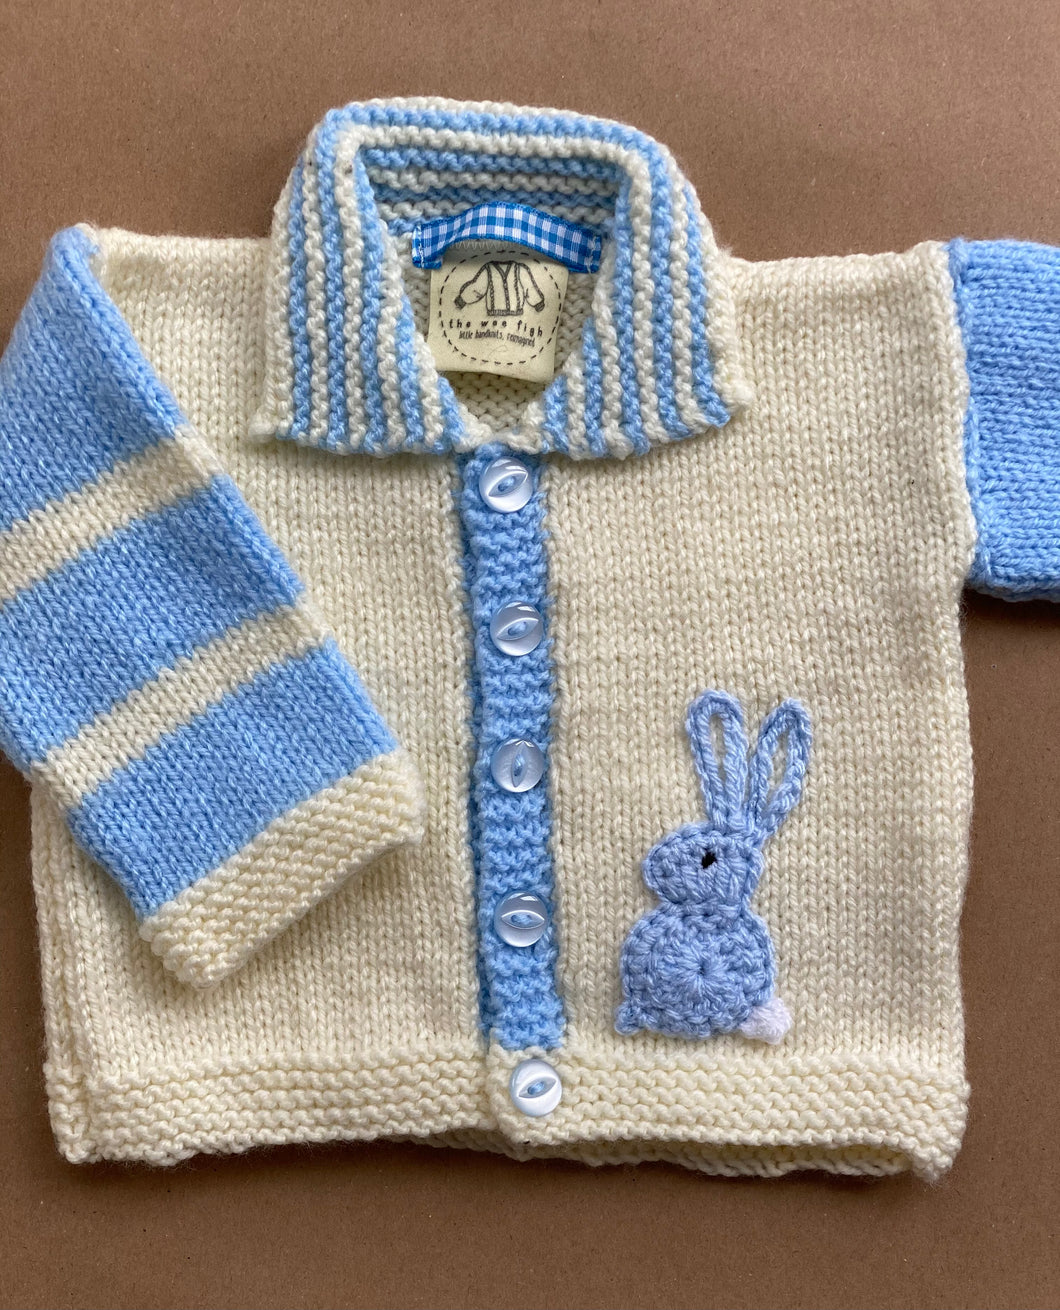 0-3 months - Cream “Bunny” cardigan with striped sleeves